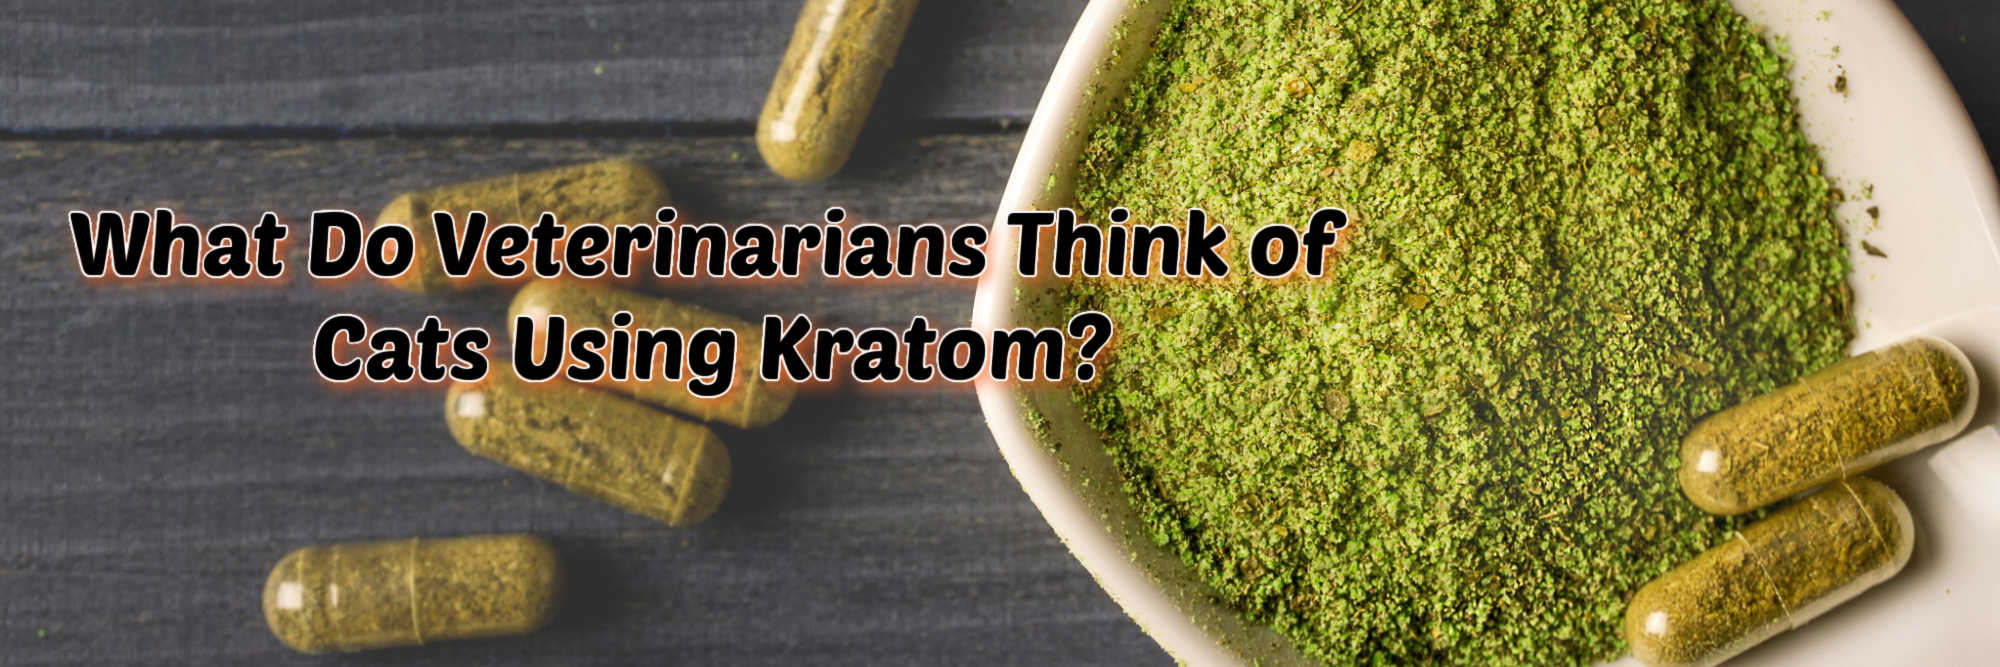 image of what do veterinarians think of cats using kratom